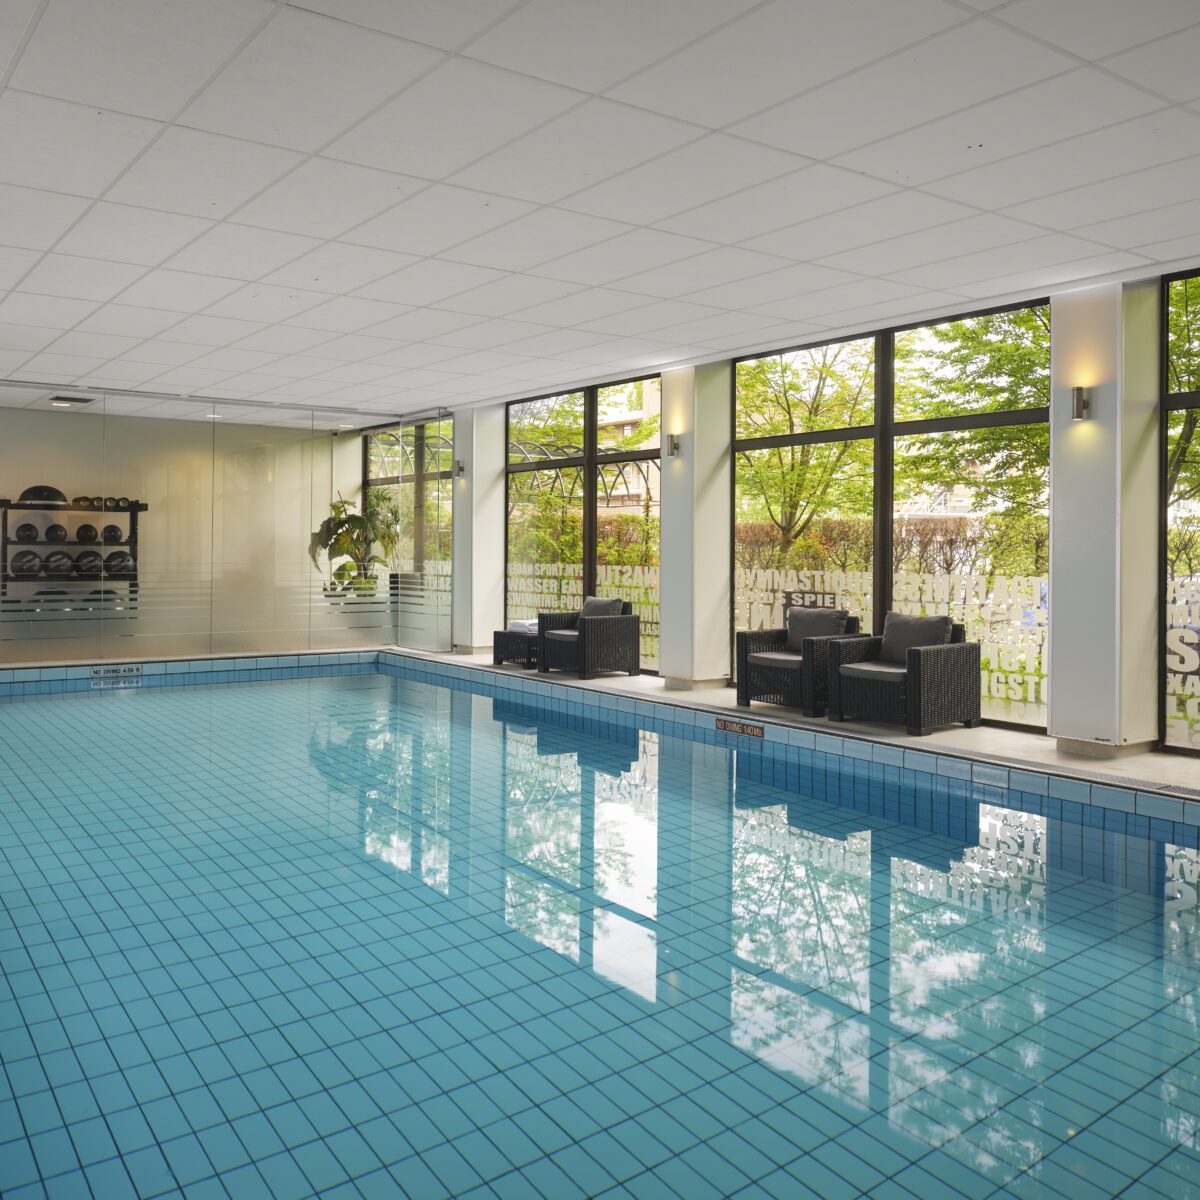 Park Plaza Eindhoven fitness and fun gym and pool area